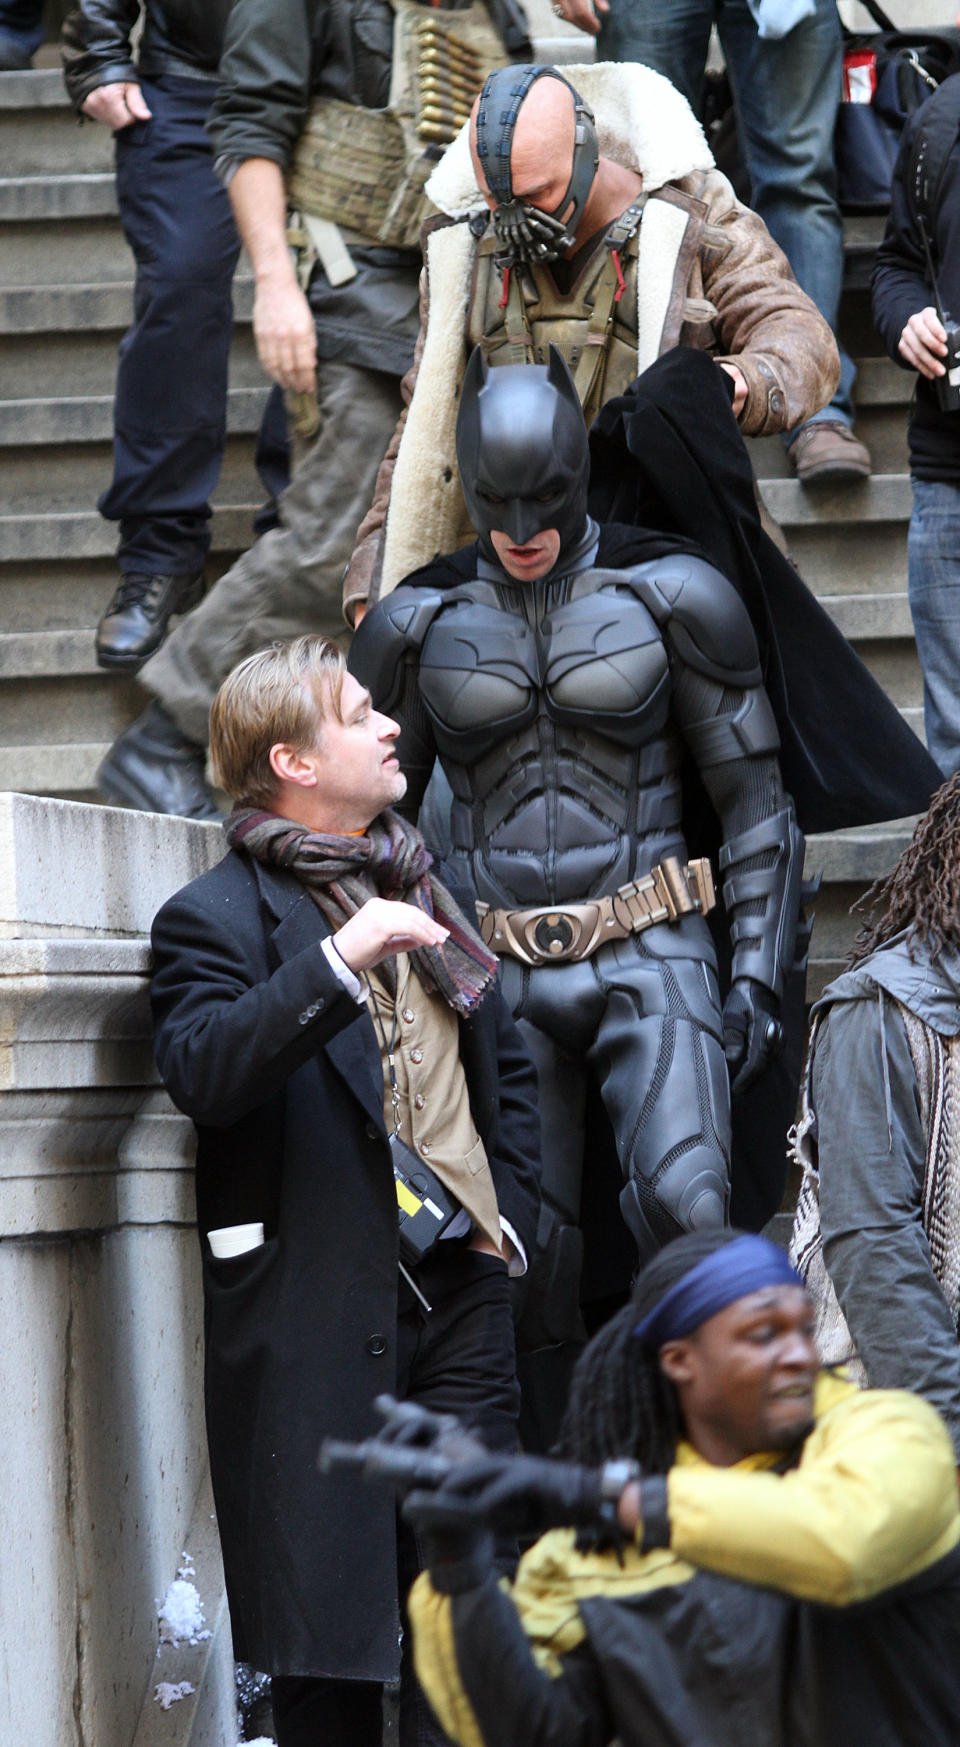 NEW YORK, NY - NOVEMBER 05:  Actors Christian Bale in costume as Batman, Tom Hardy as Bane  and director Christopher Nolan are seen on the set of "The Dark Knight Rises" on location on Wall Street on November 5, 2011 in New York City.  (Photo by Marcel Thomas/FilmMagic)